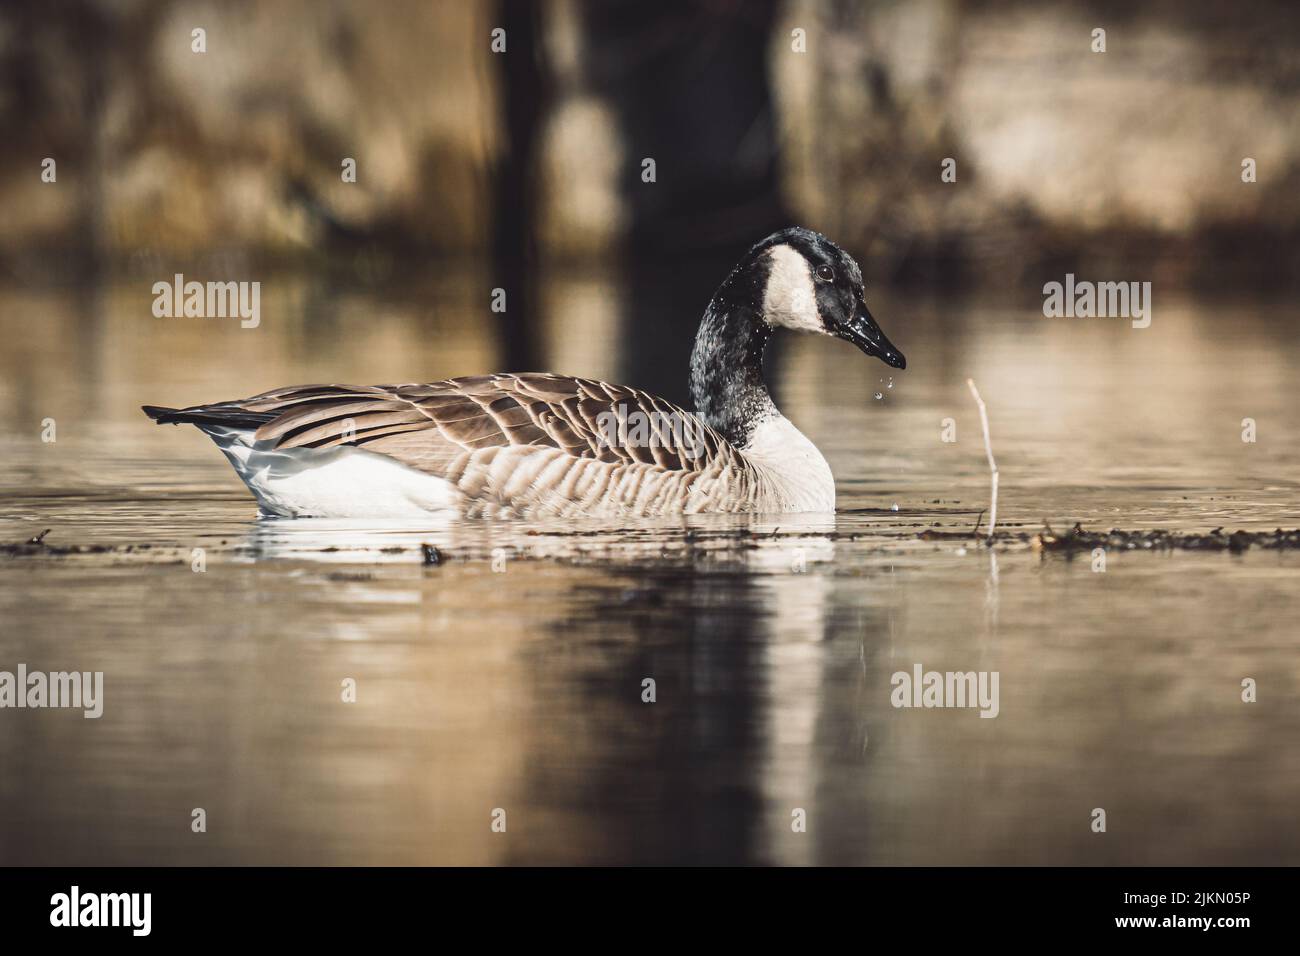 A closeup of a canada goose (Branta canadensis) swimming on a lake Stock Photo